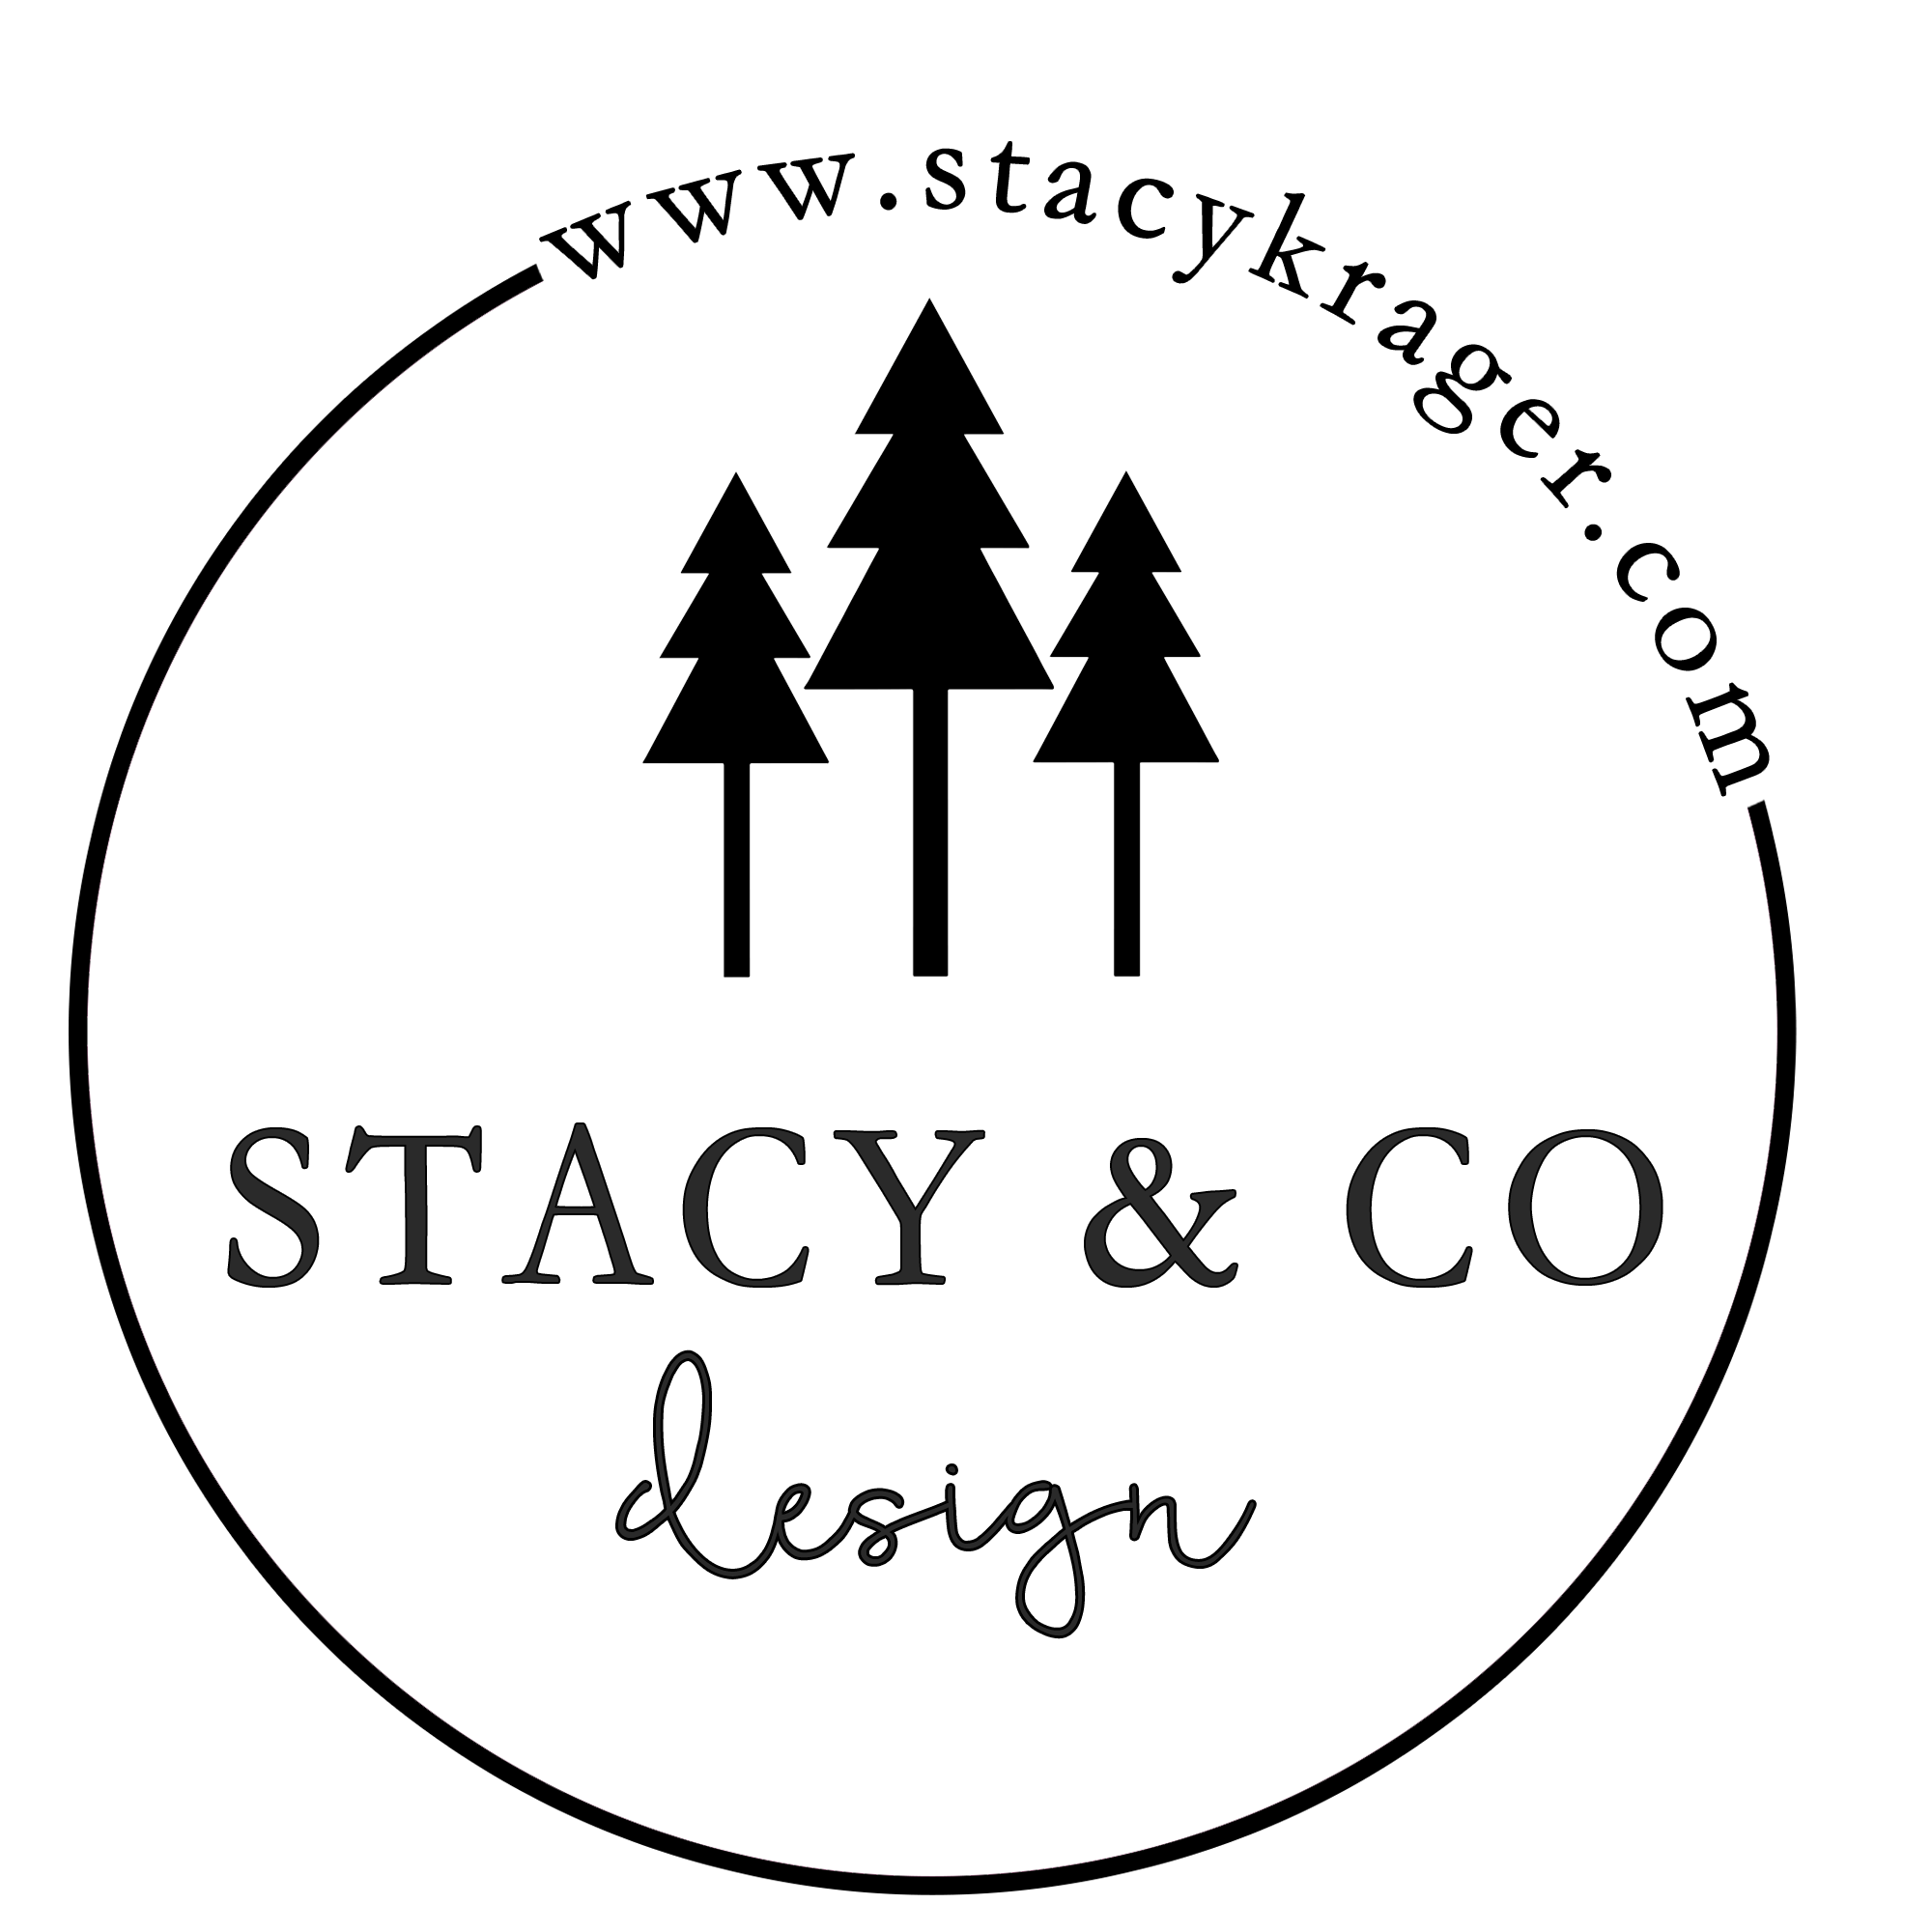 Stacy & Co